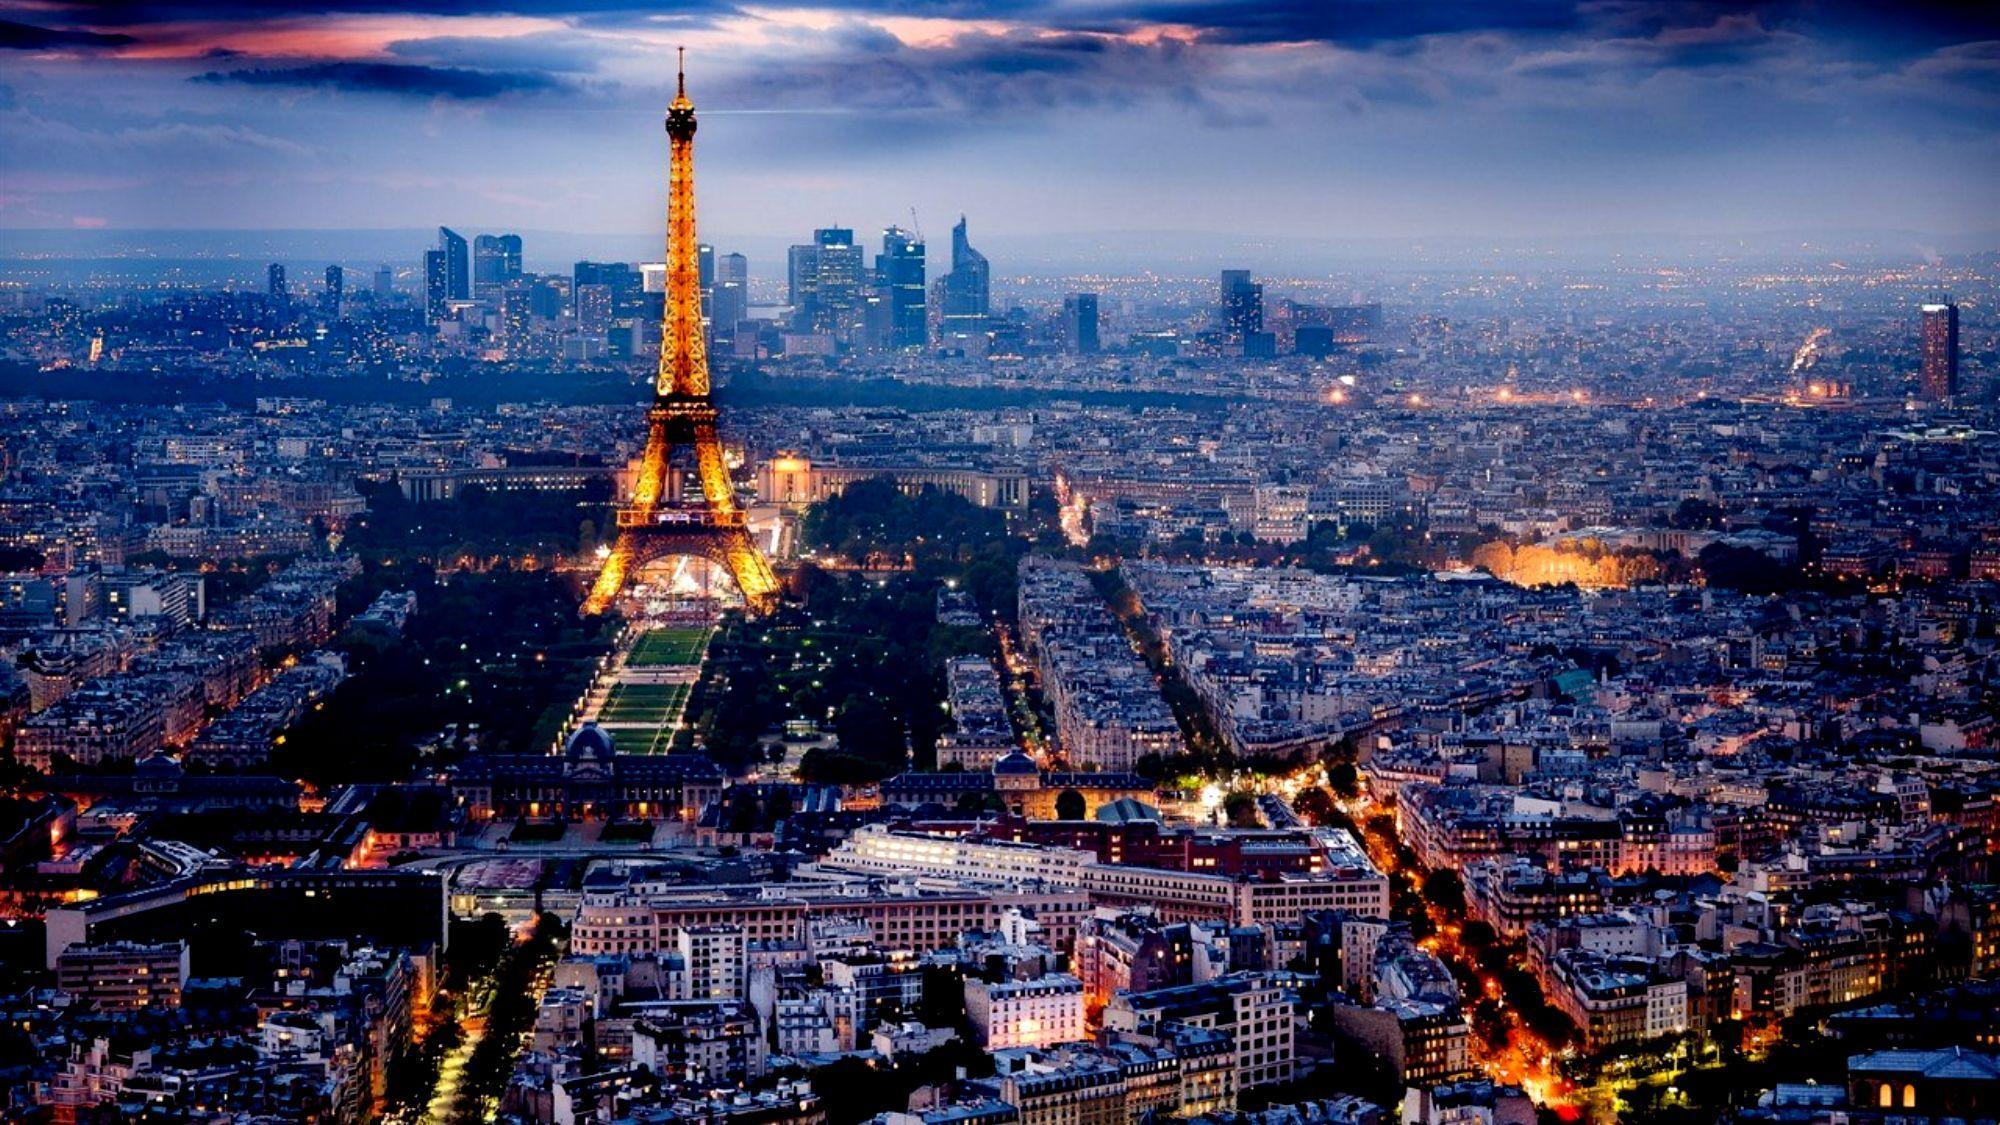 Download free Paris Wallpaper for your computer and laptop. You can